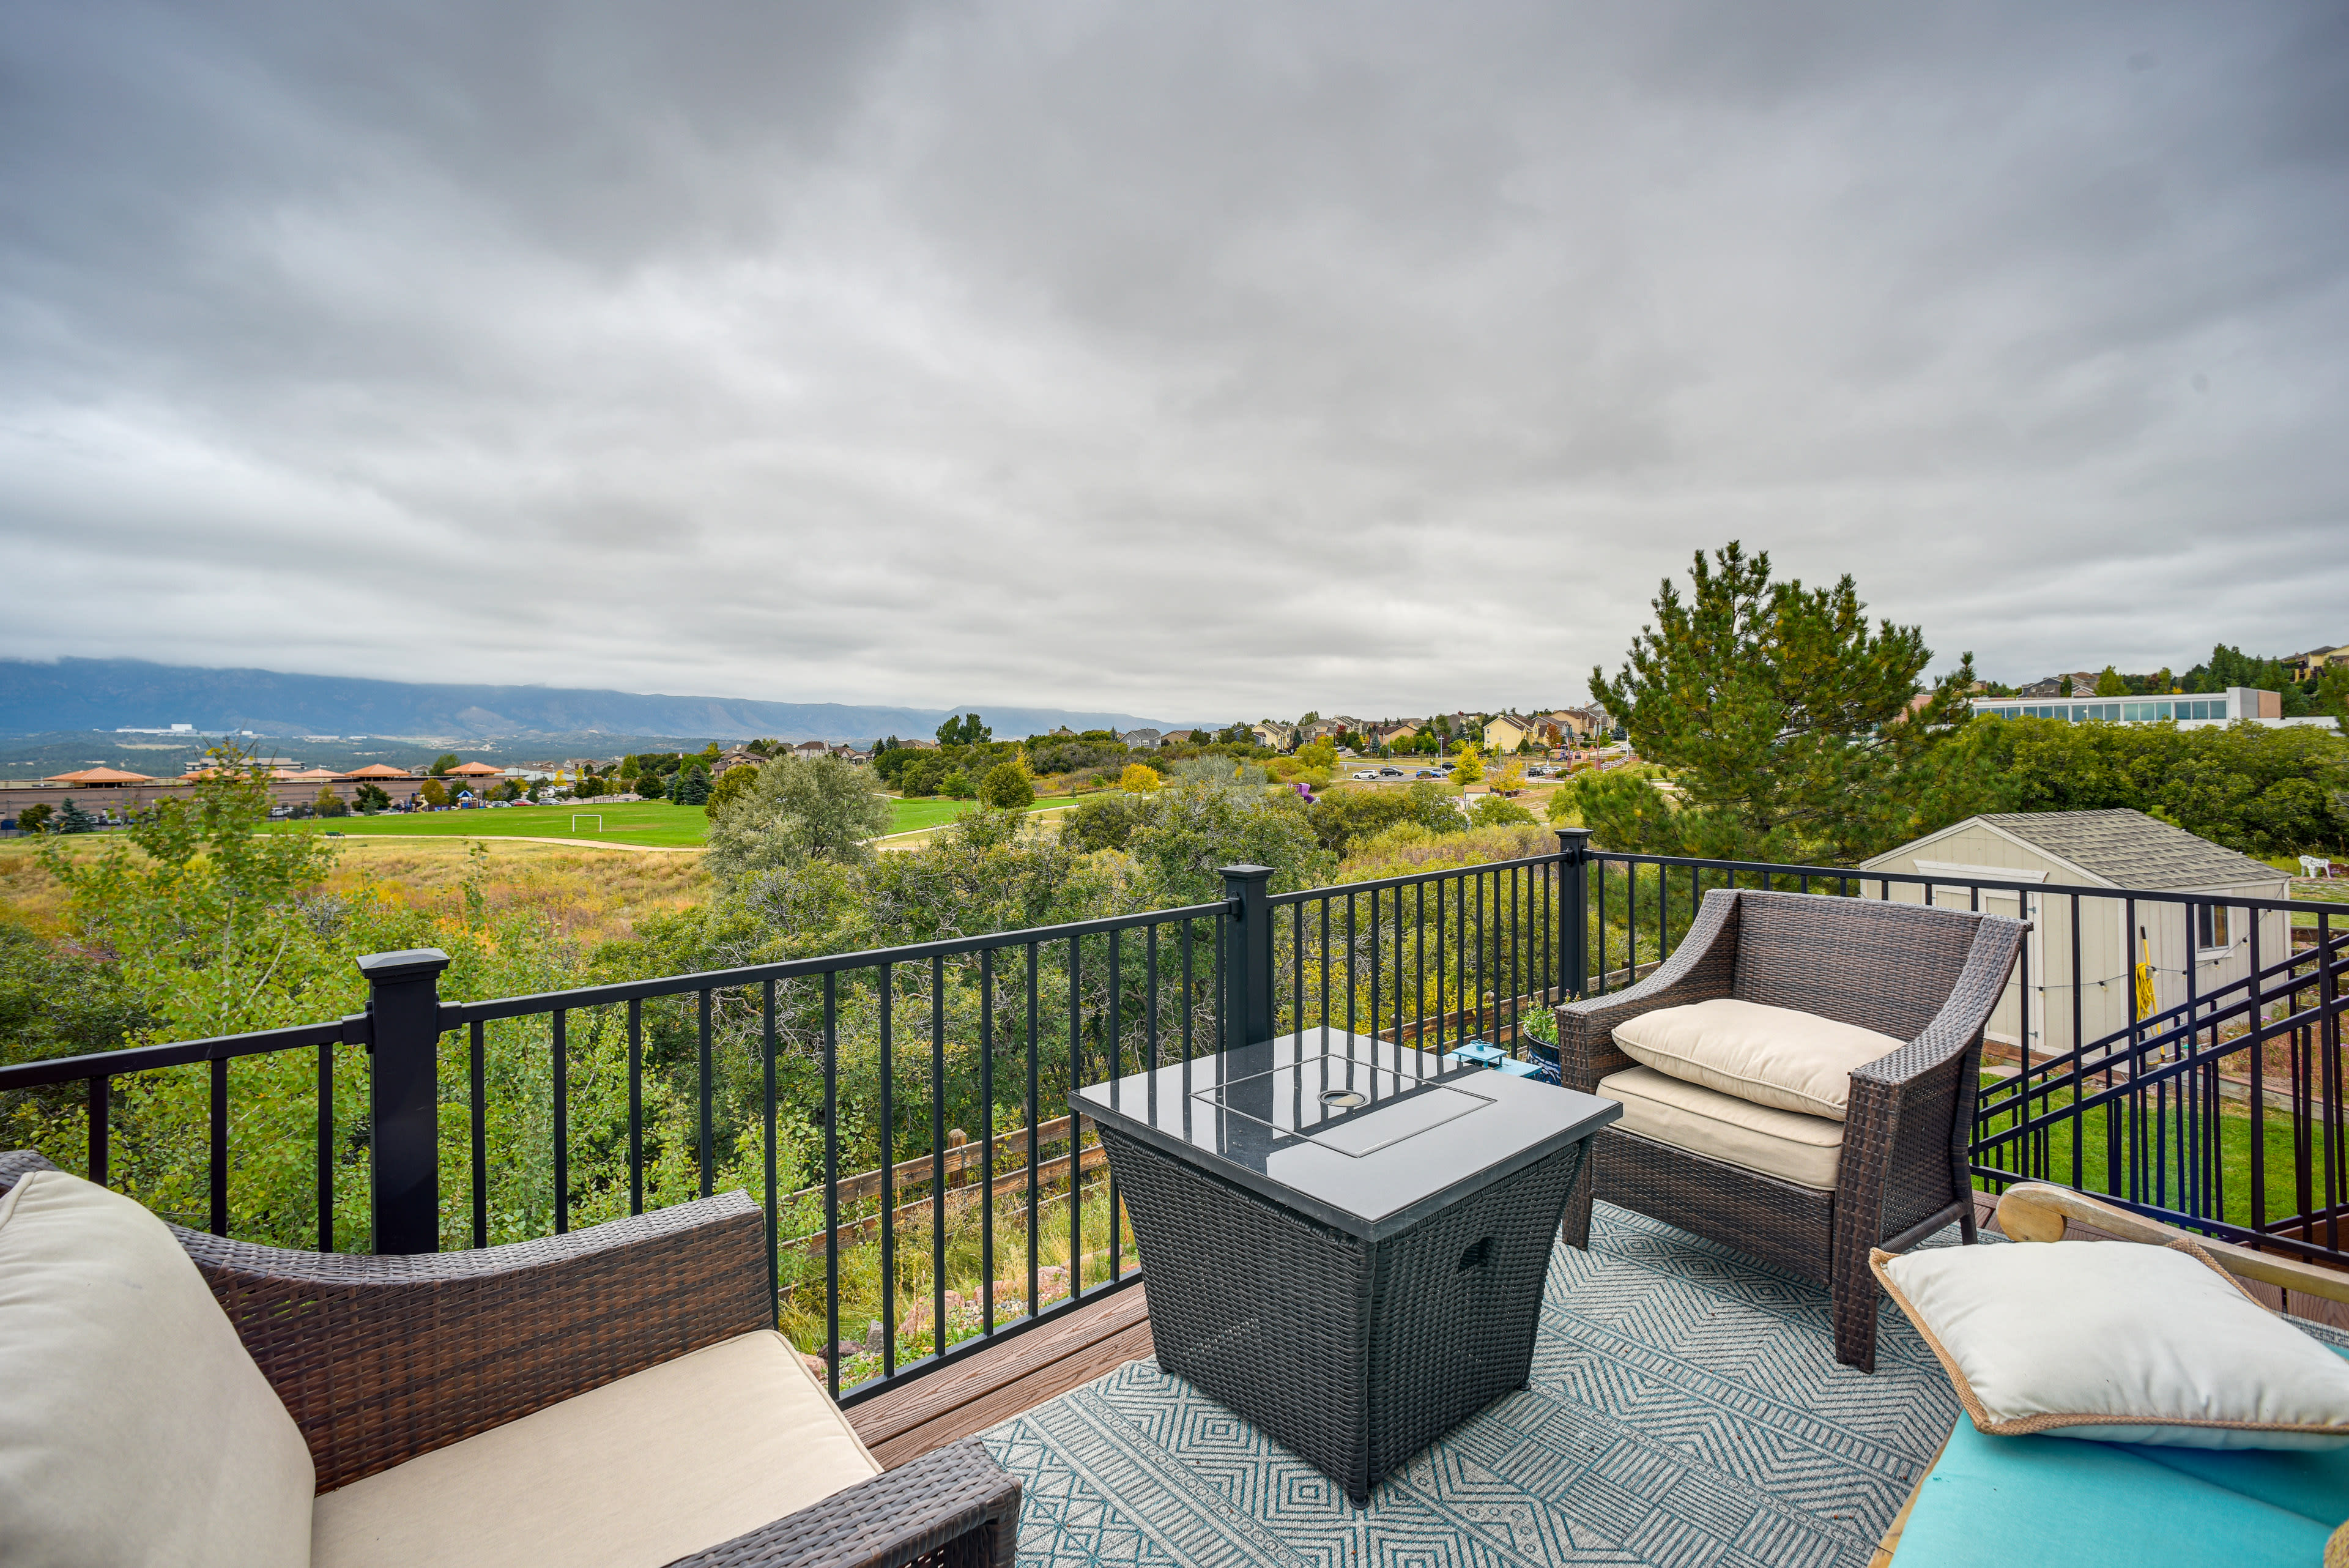 Upper Deck | Fire Pit | Outdoor Dining Area | Mountain Views